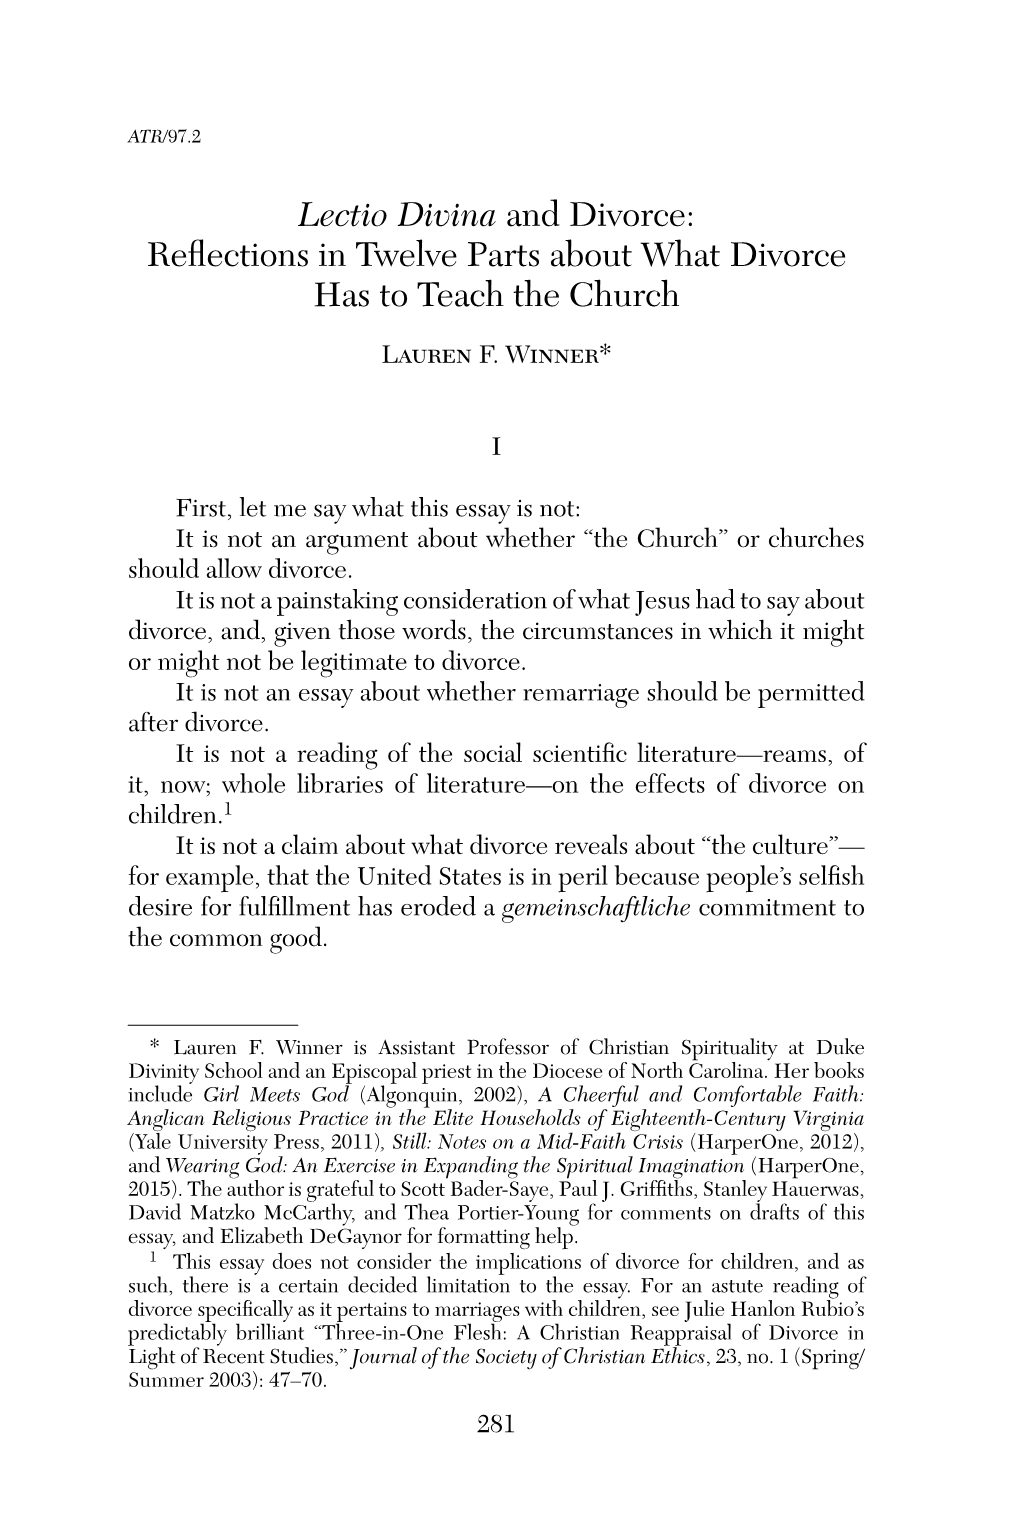 Lectio Divina and Divorce: Reflections in Twelve Parts About What Divorce Has to Teach the Church